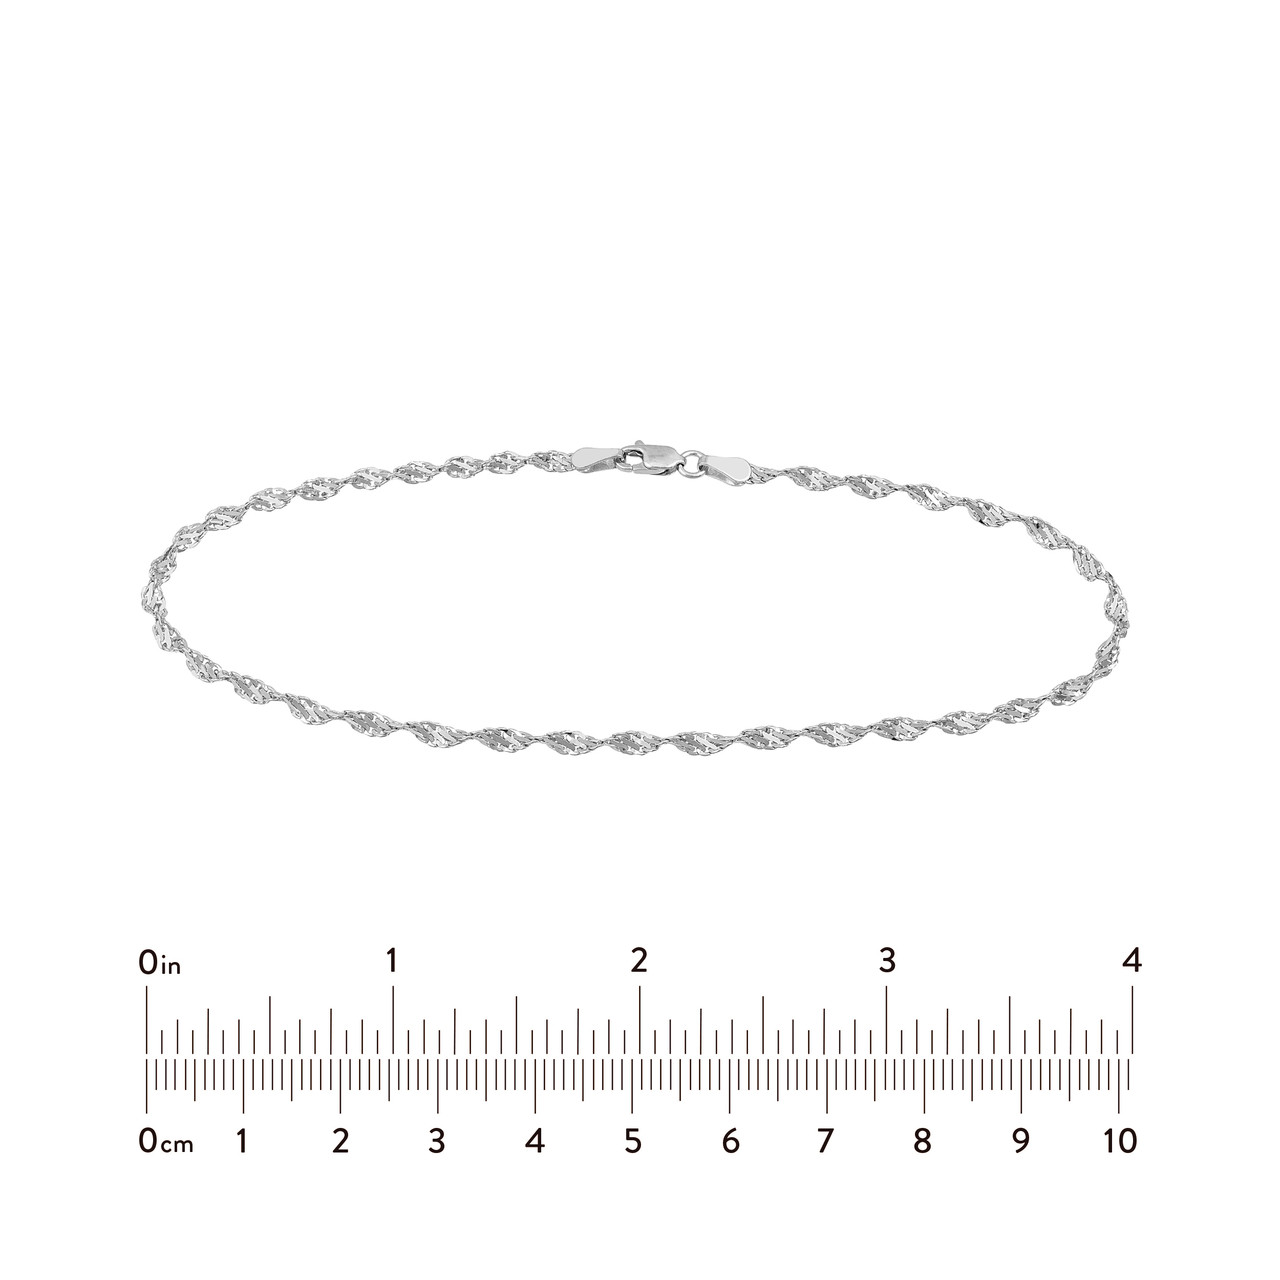 Sterling Silver 2.9mm Dorica Chain with Lobster Lock